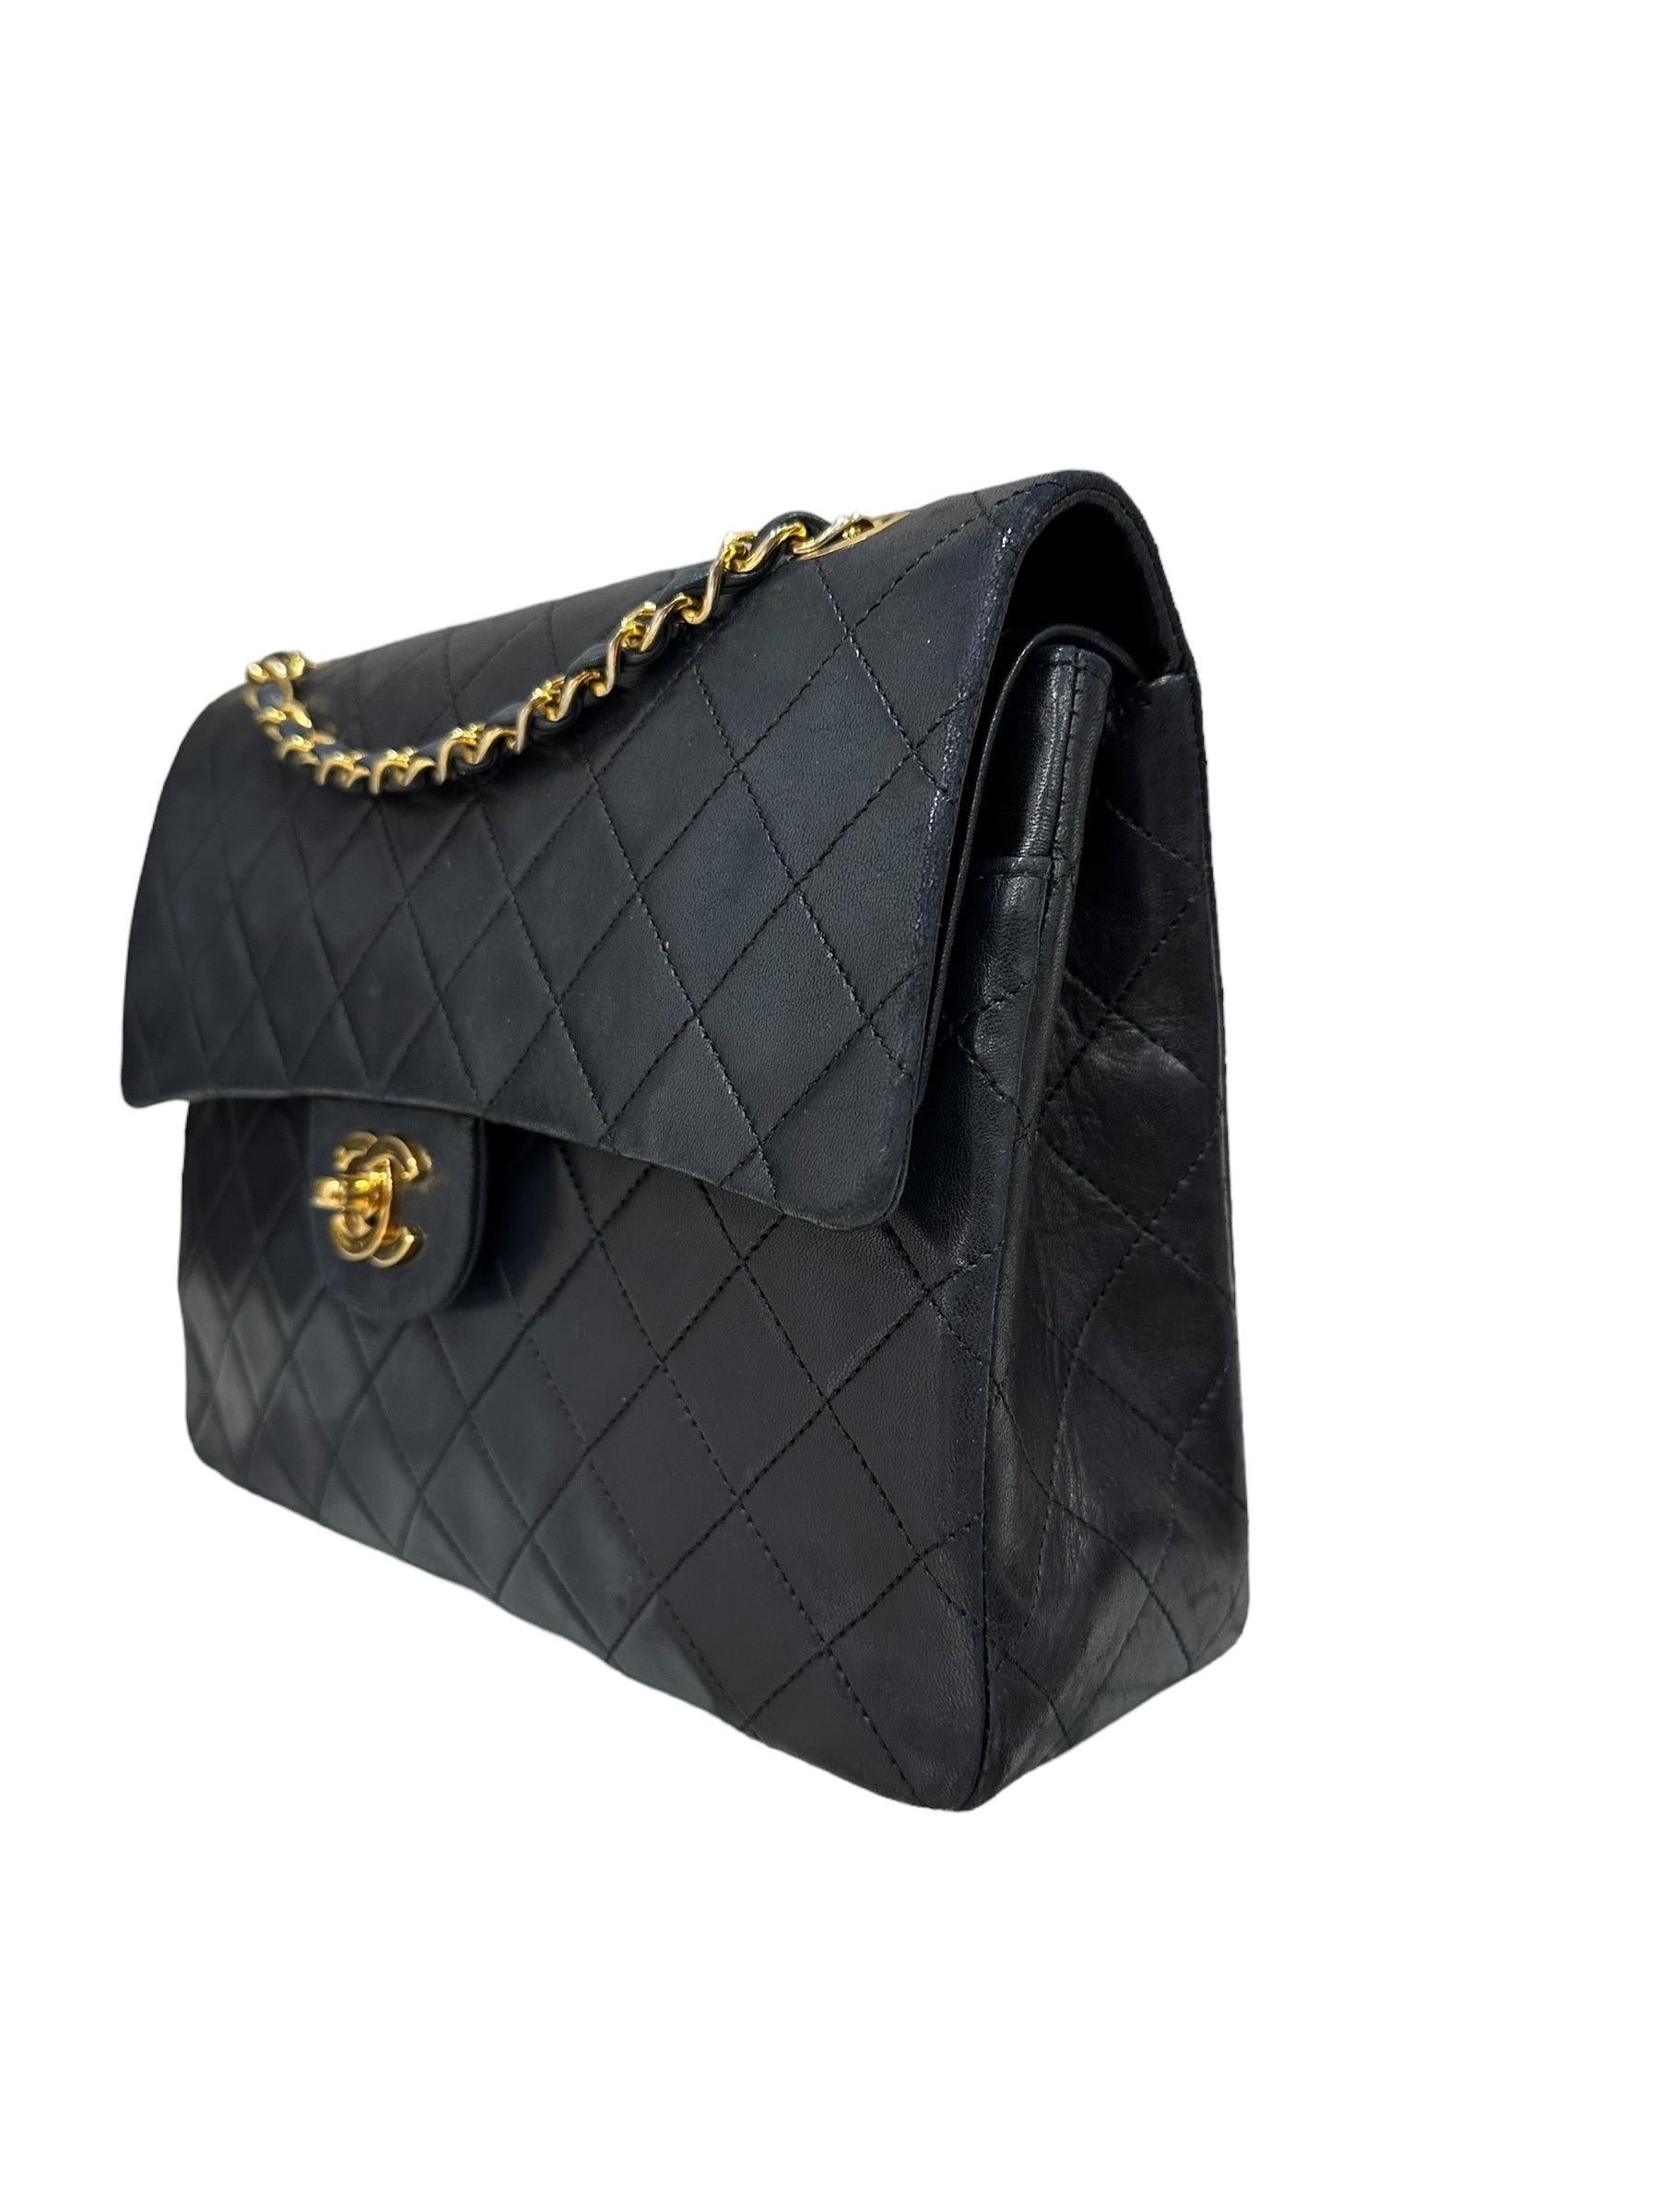 90’ Chanel Timeless 2.55 Vertical Borsa a Tracolla Nera  For Sale 2